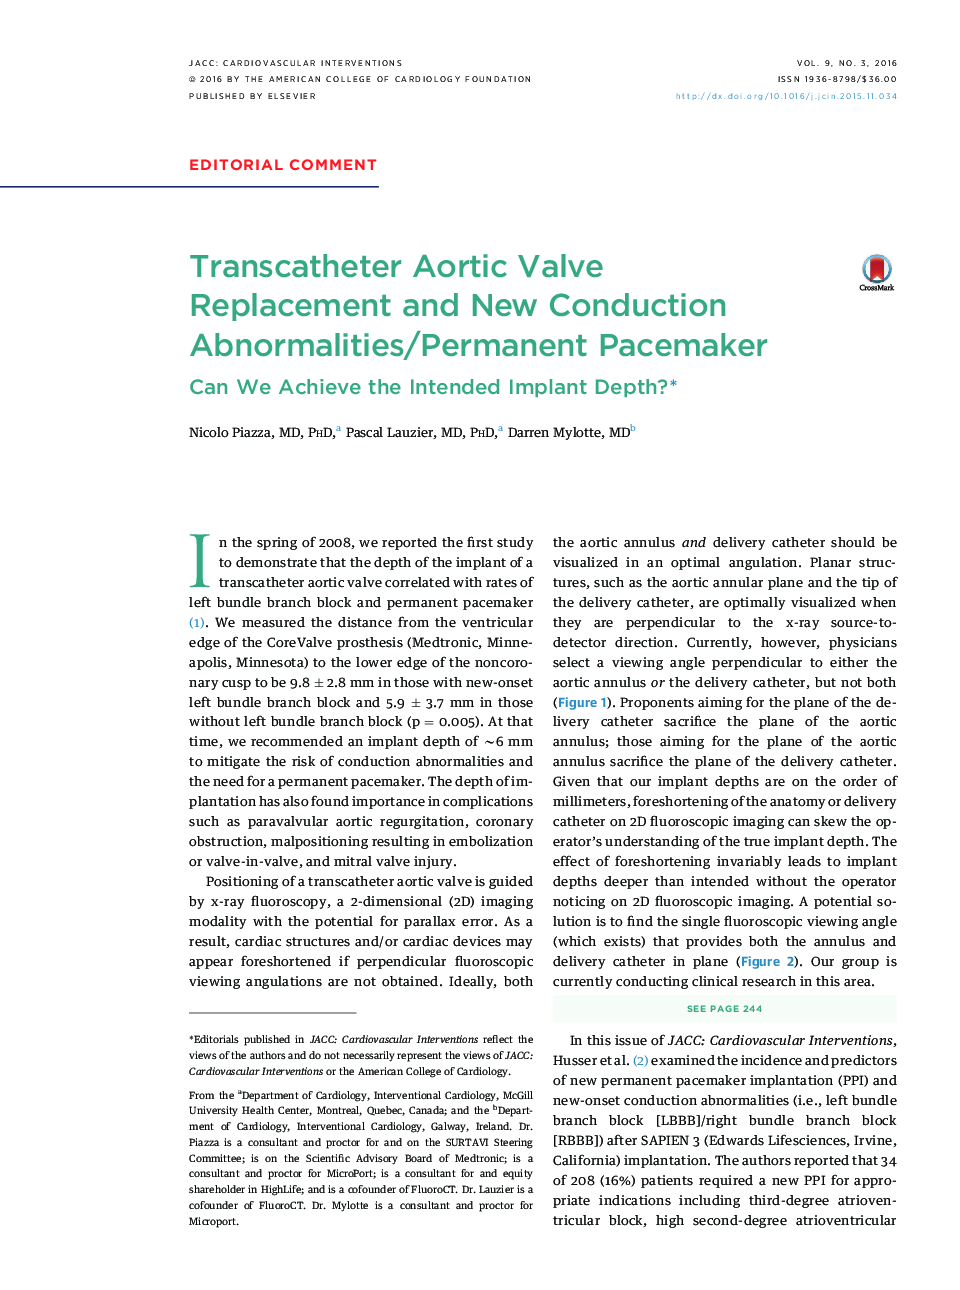 Transcatheter Aortic Valve Replacement and New Conduction Abnormalities/Permanent Pacemaker